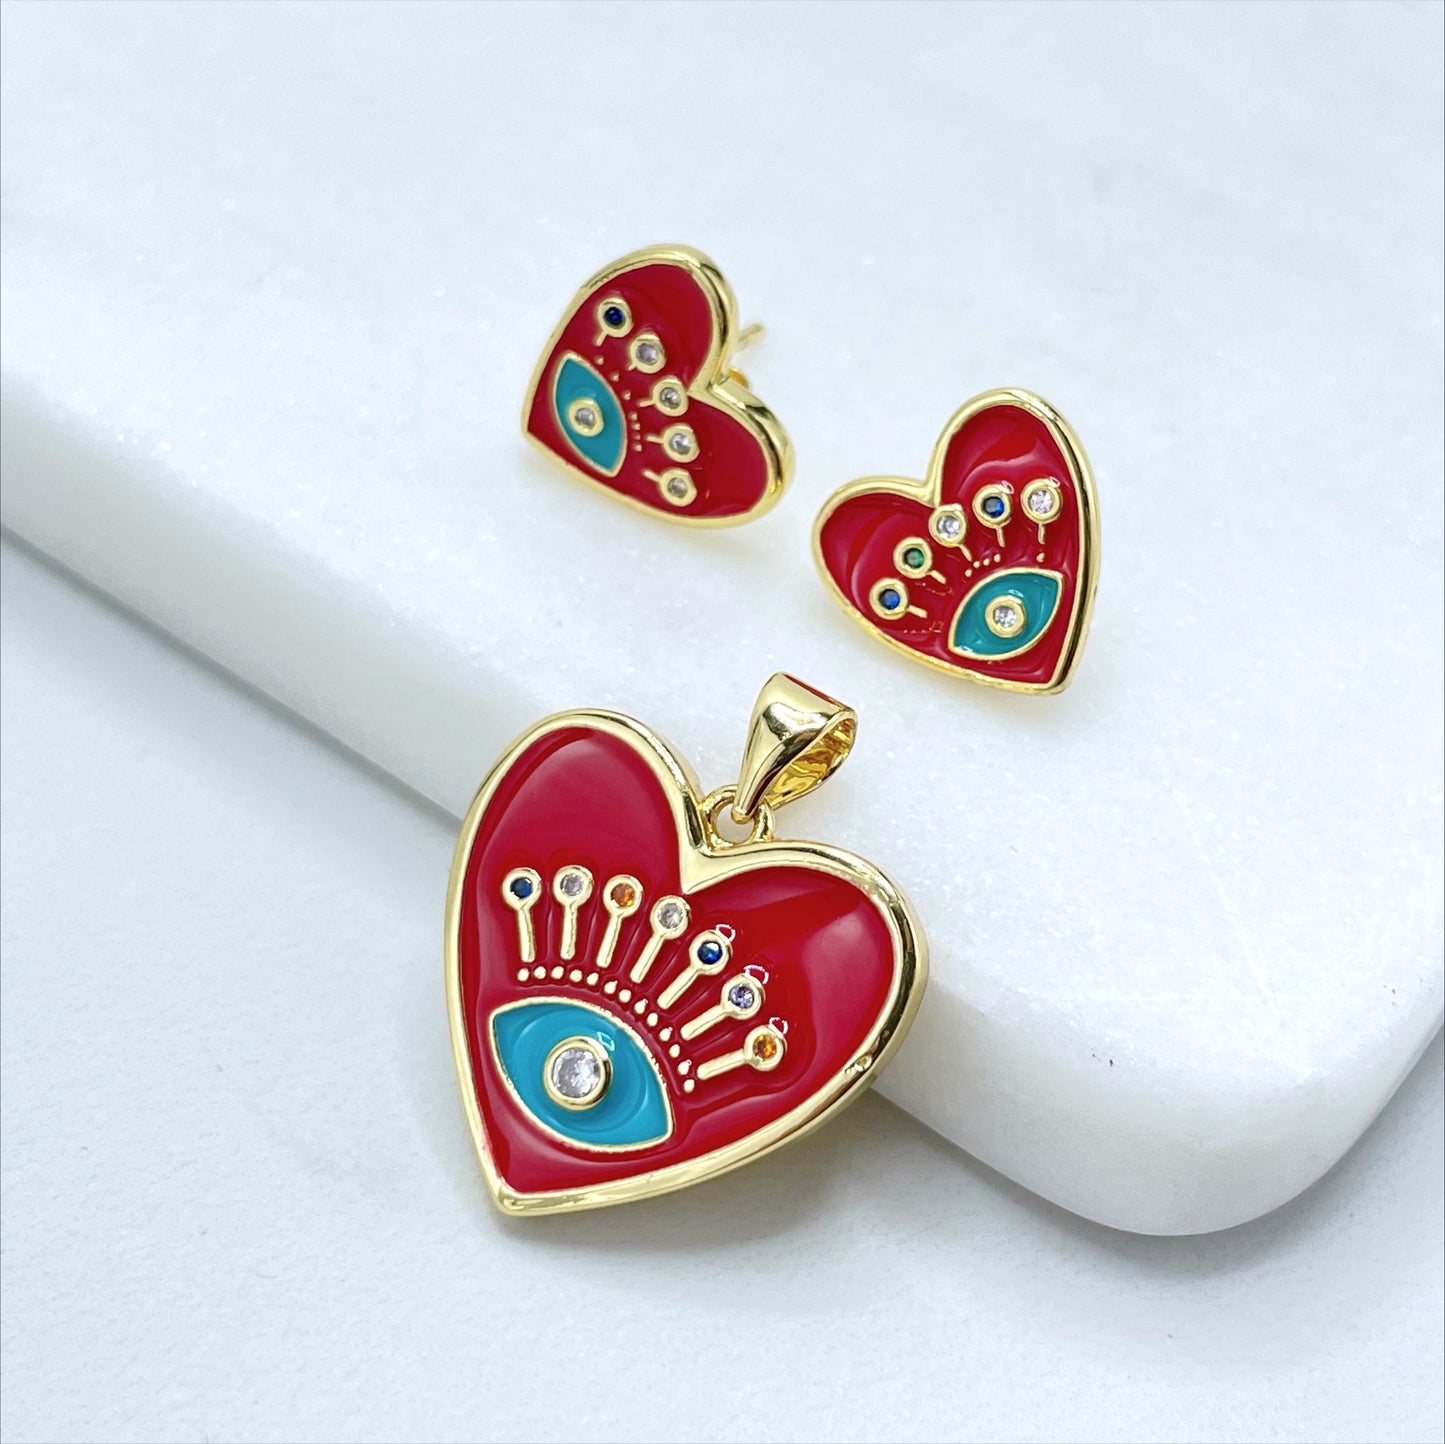 18k Gold Filled 2mm Curb Link Chain, Red Enamel with Colored Micro CZ Evil Eyes Heart Shape Earrings and Charm, Wholesale Jewelry Supplies